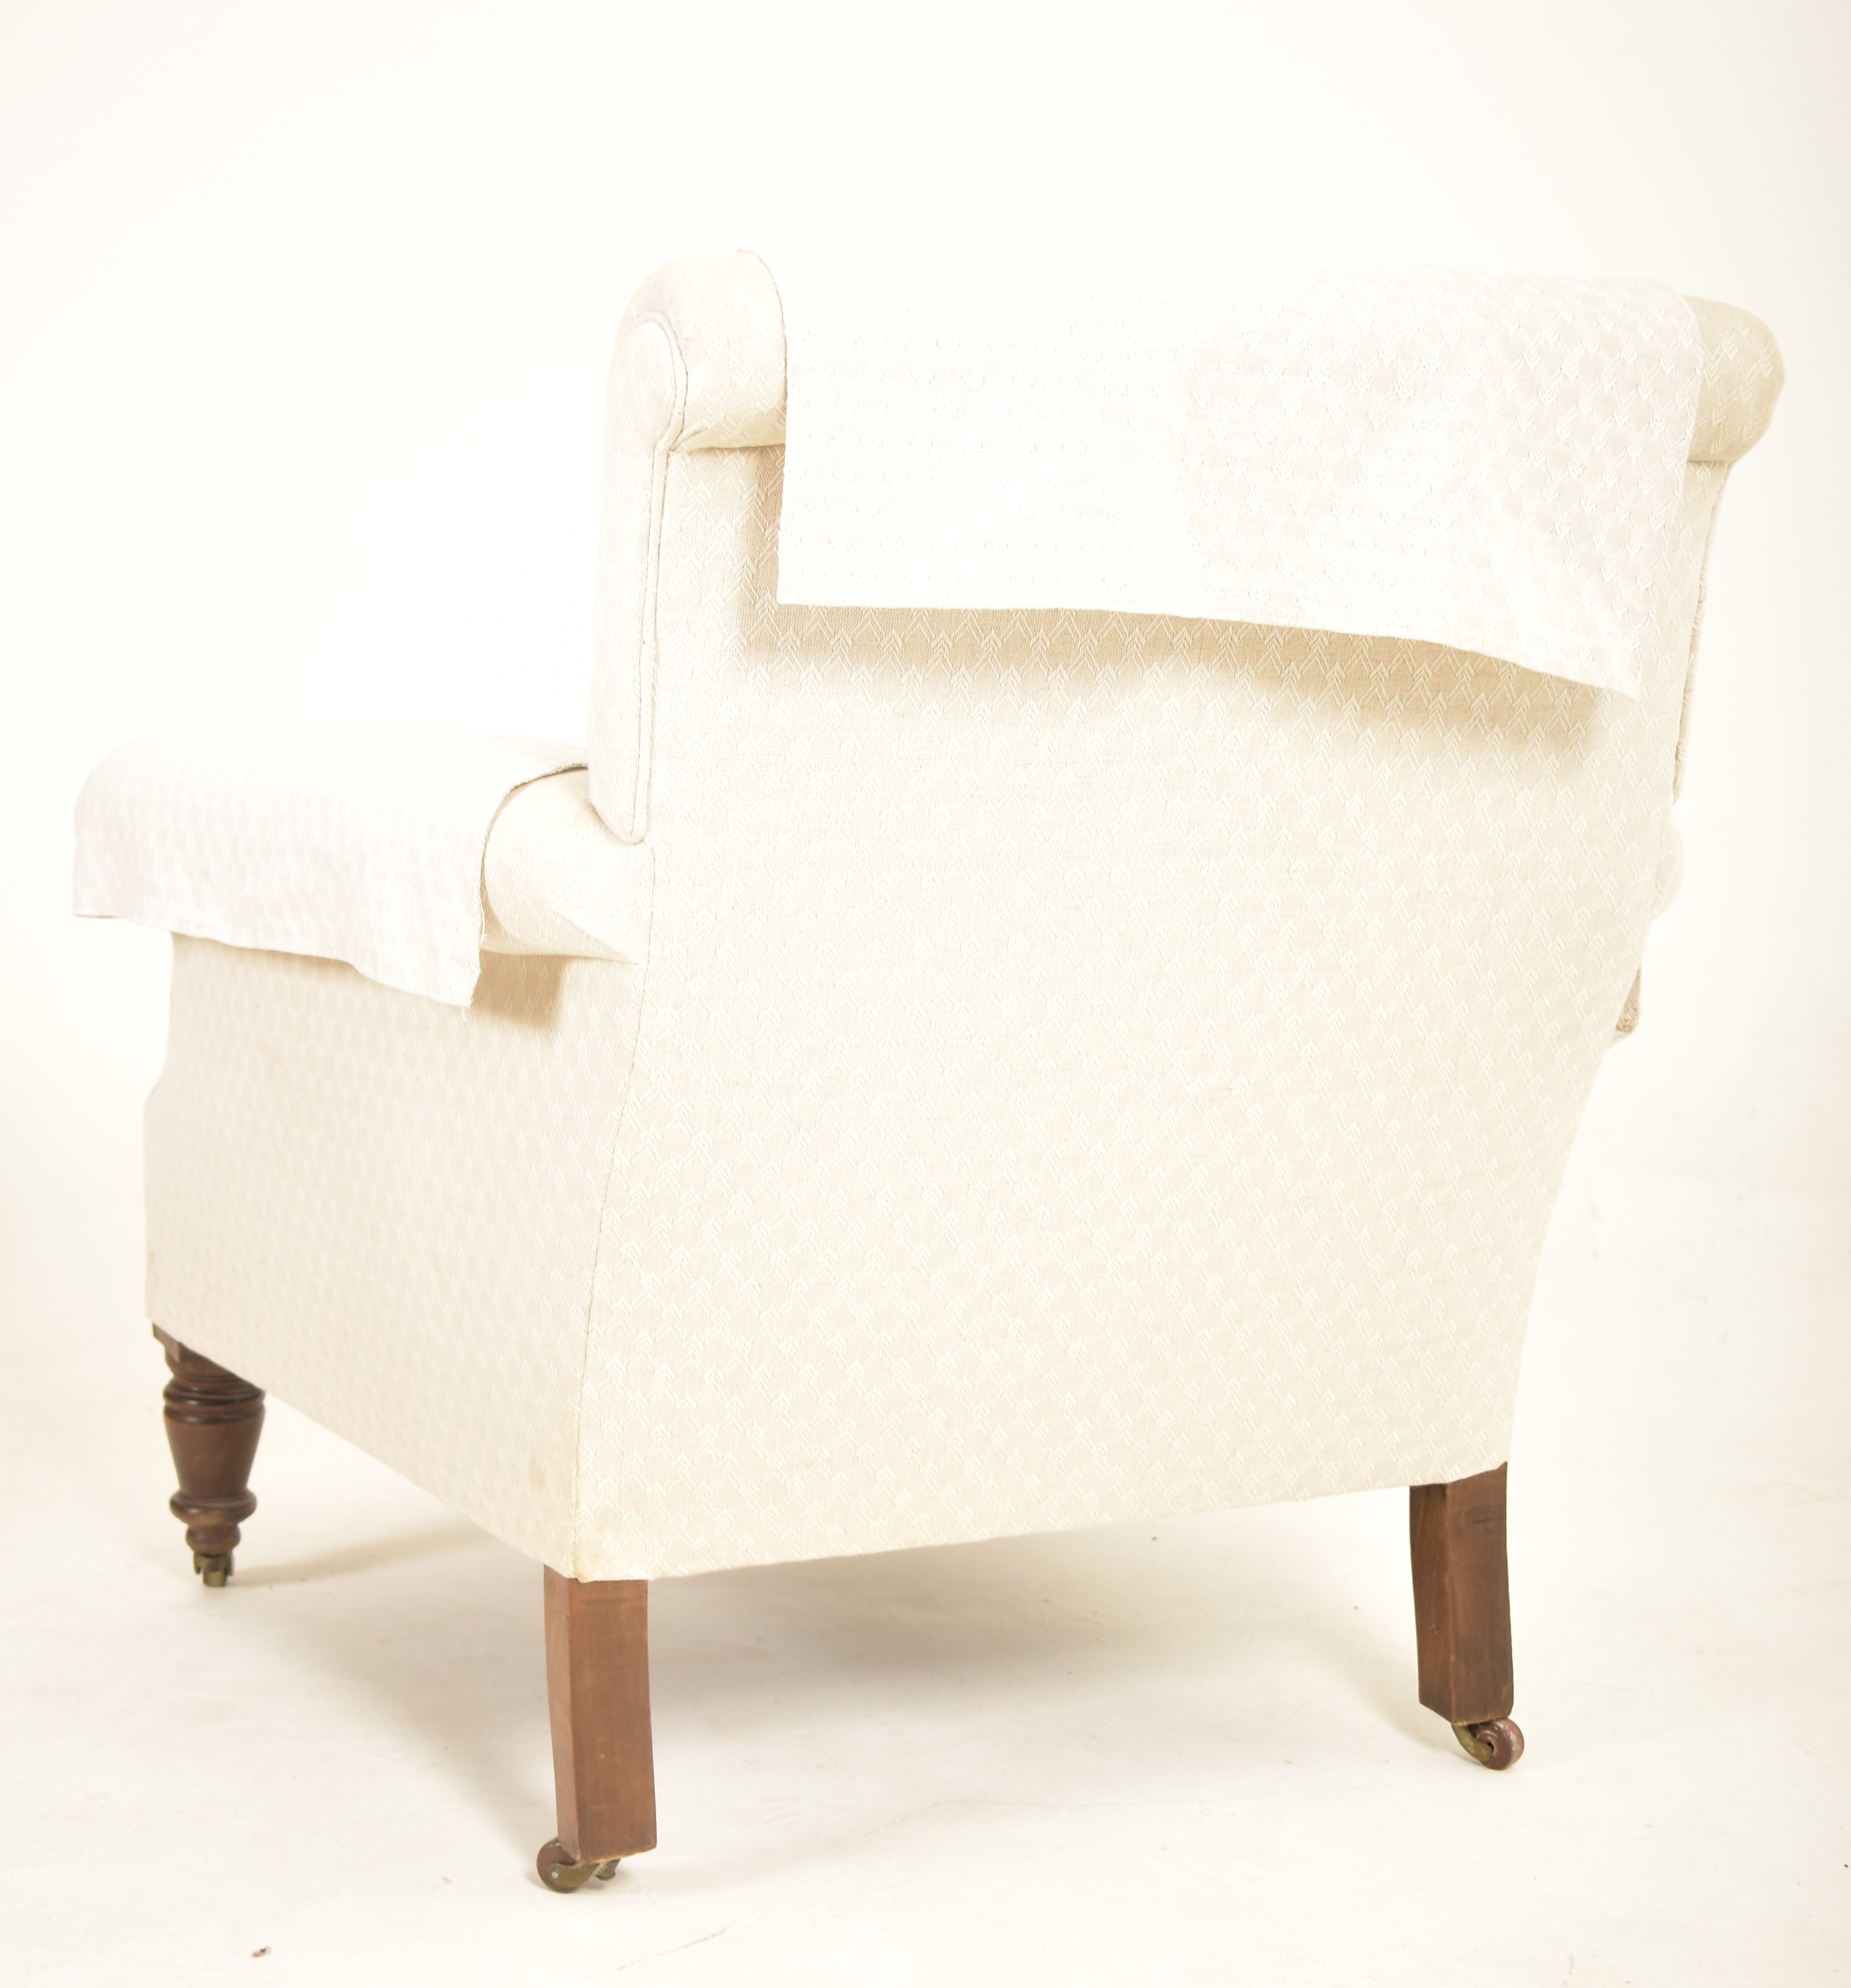 HOWARD & SONS STYLE VICTORIAN UPHOLSTERED ARMCHAIR - Image 7 of 7